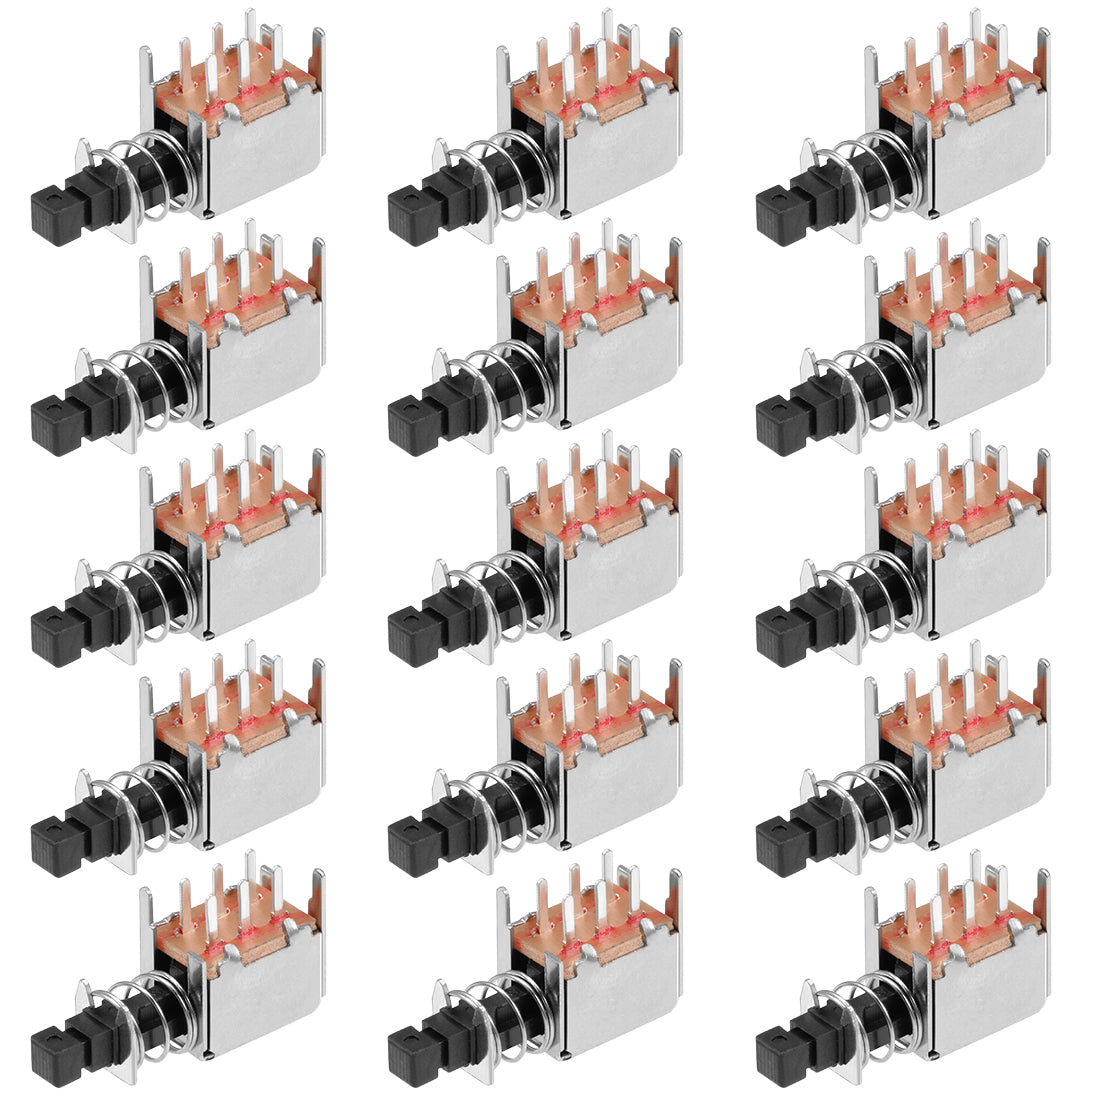 uxcell Uxcell Push Button Switch DPDT 6 Pin 1 Position Self-Locking Black 15pcs